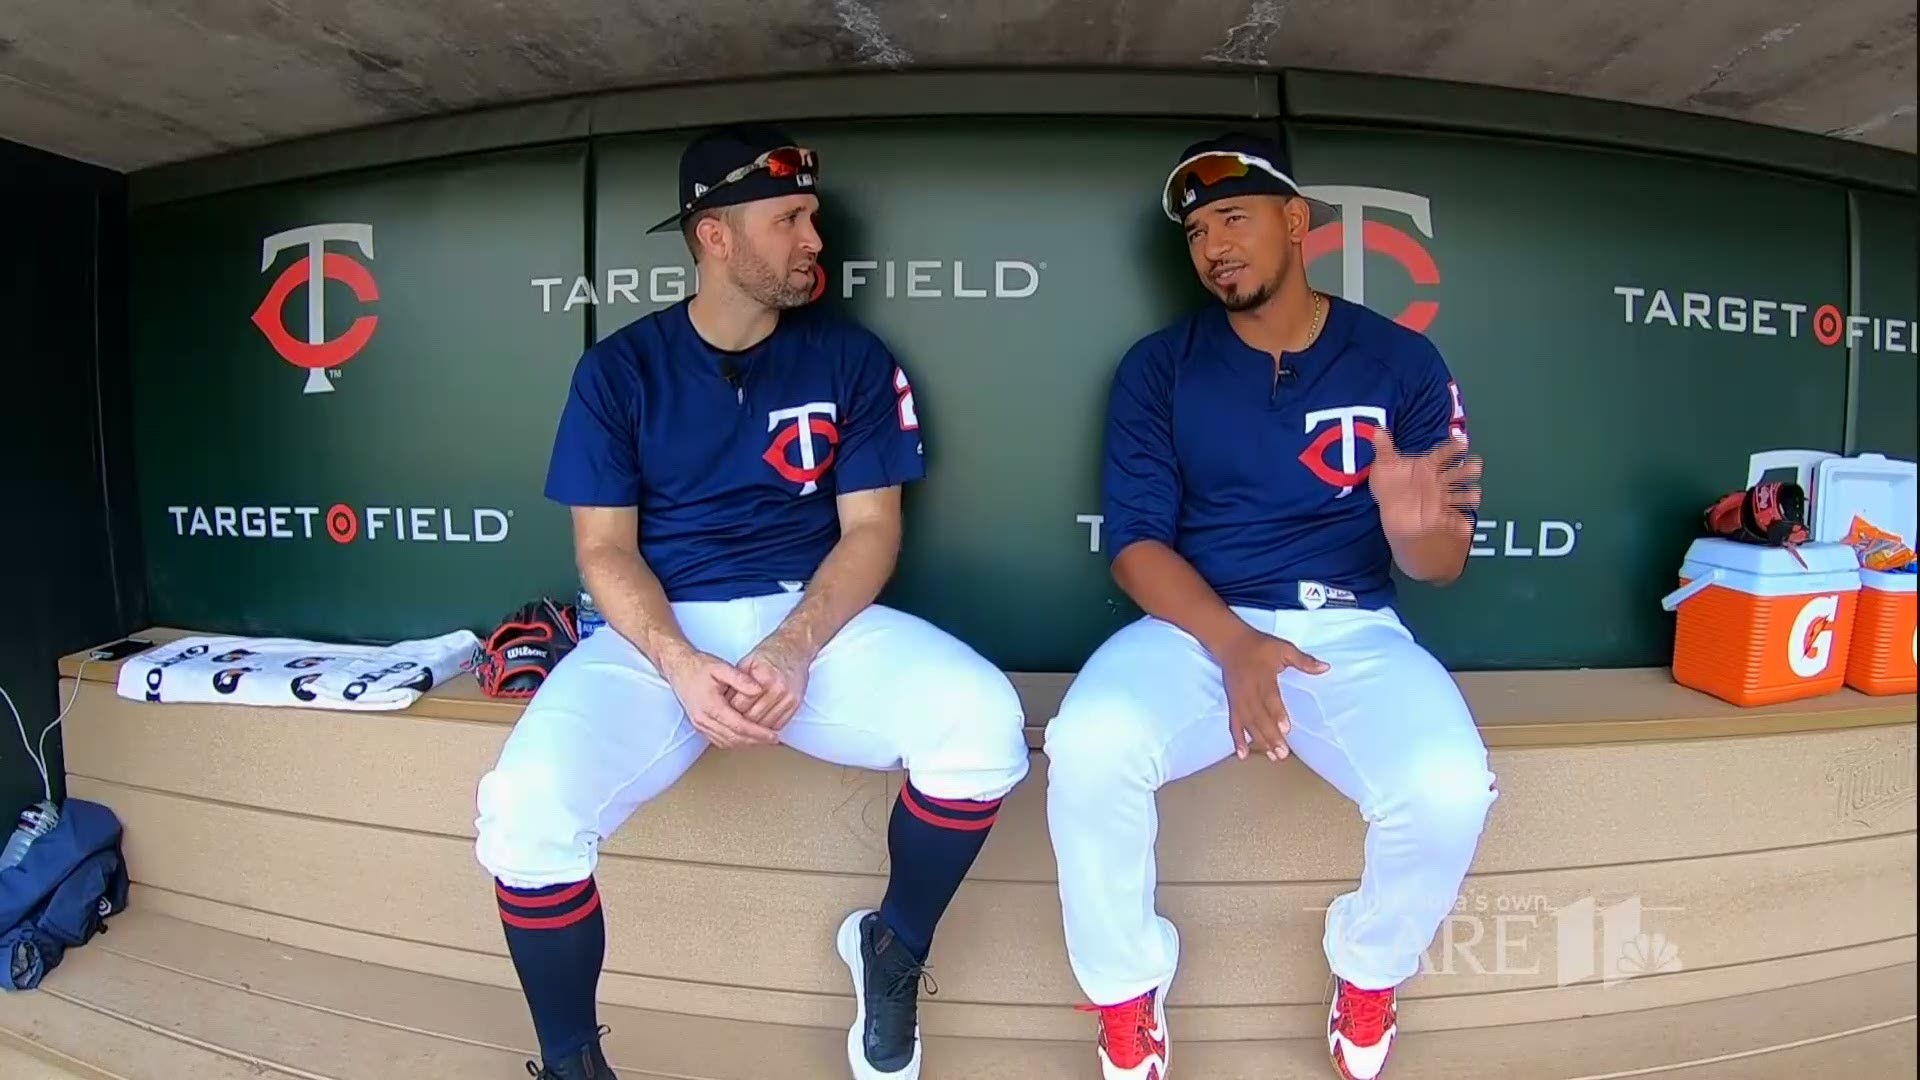 An extended cut of the KARE 11's "Players Only" featuring Minnesota Twins Brian Dozier and Eduardo Escobar